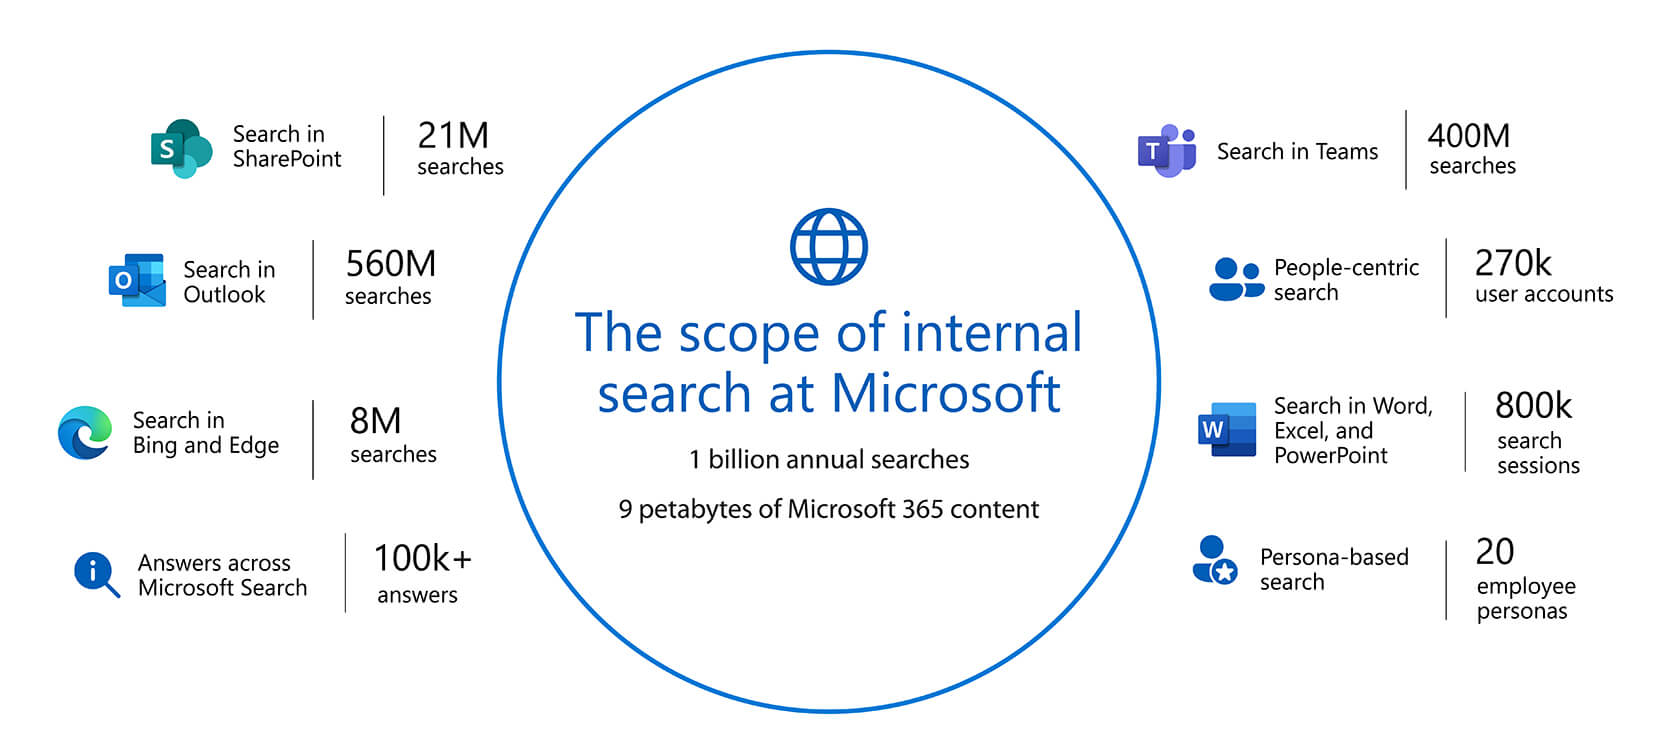 The scope of search across the enterprise, encompassing several tools and the 1 billion searches Microsoft employees conduct annually.